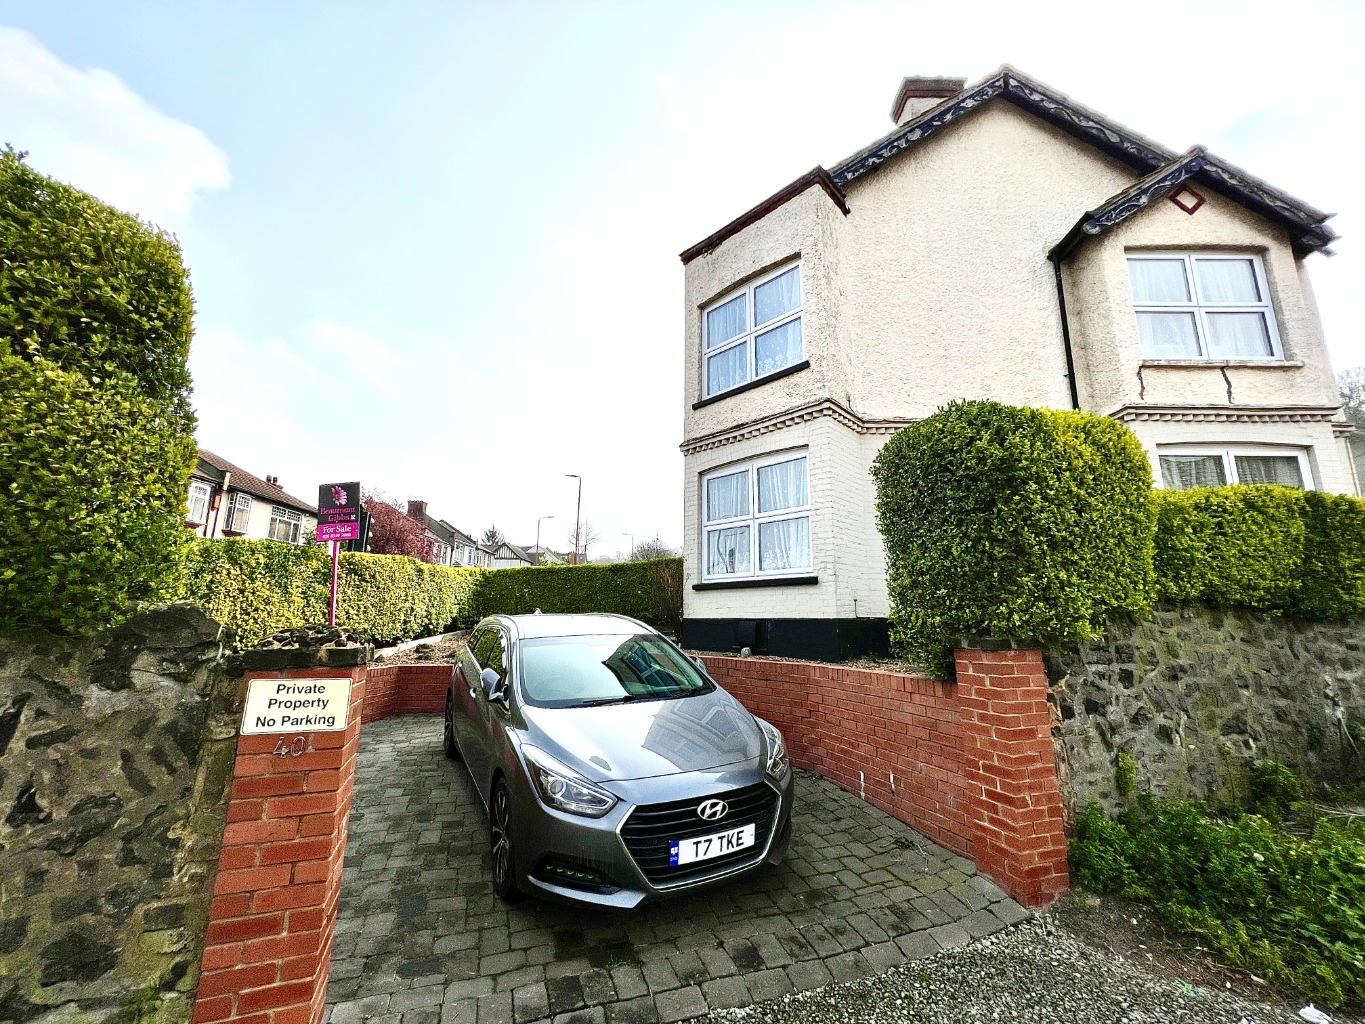 Beaumont Gibbs are offering for sale with NO FORWARD CHAIN, this very spacious three bedroomed end of terrace house for sale. Situated on a corner location on Bostall Hill, with the picturesque Bostall Hill Woods further up the road.